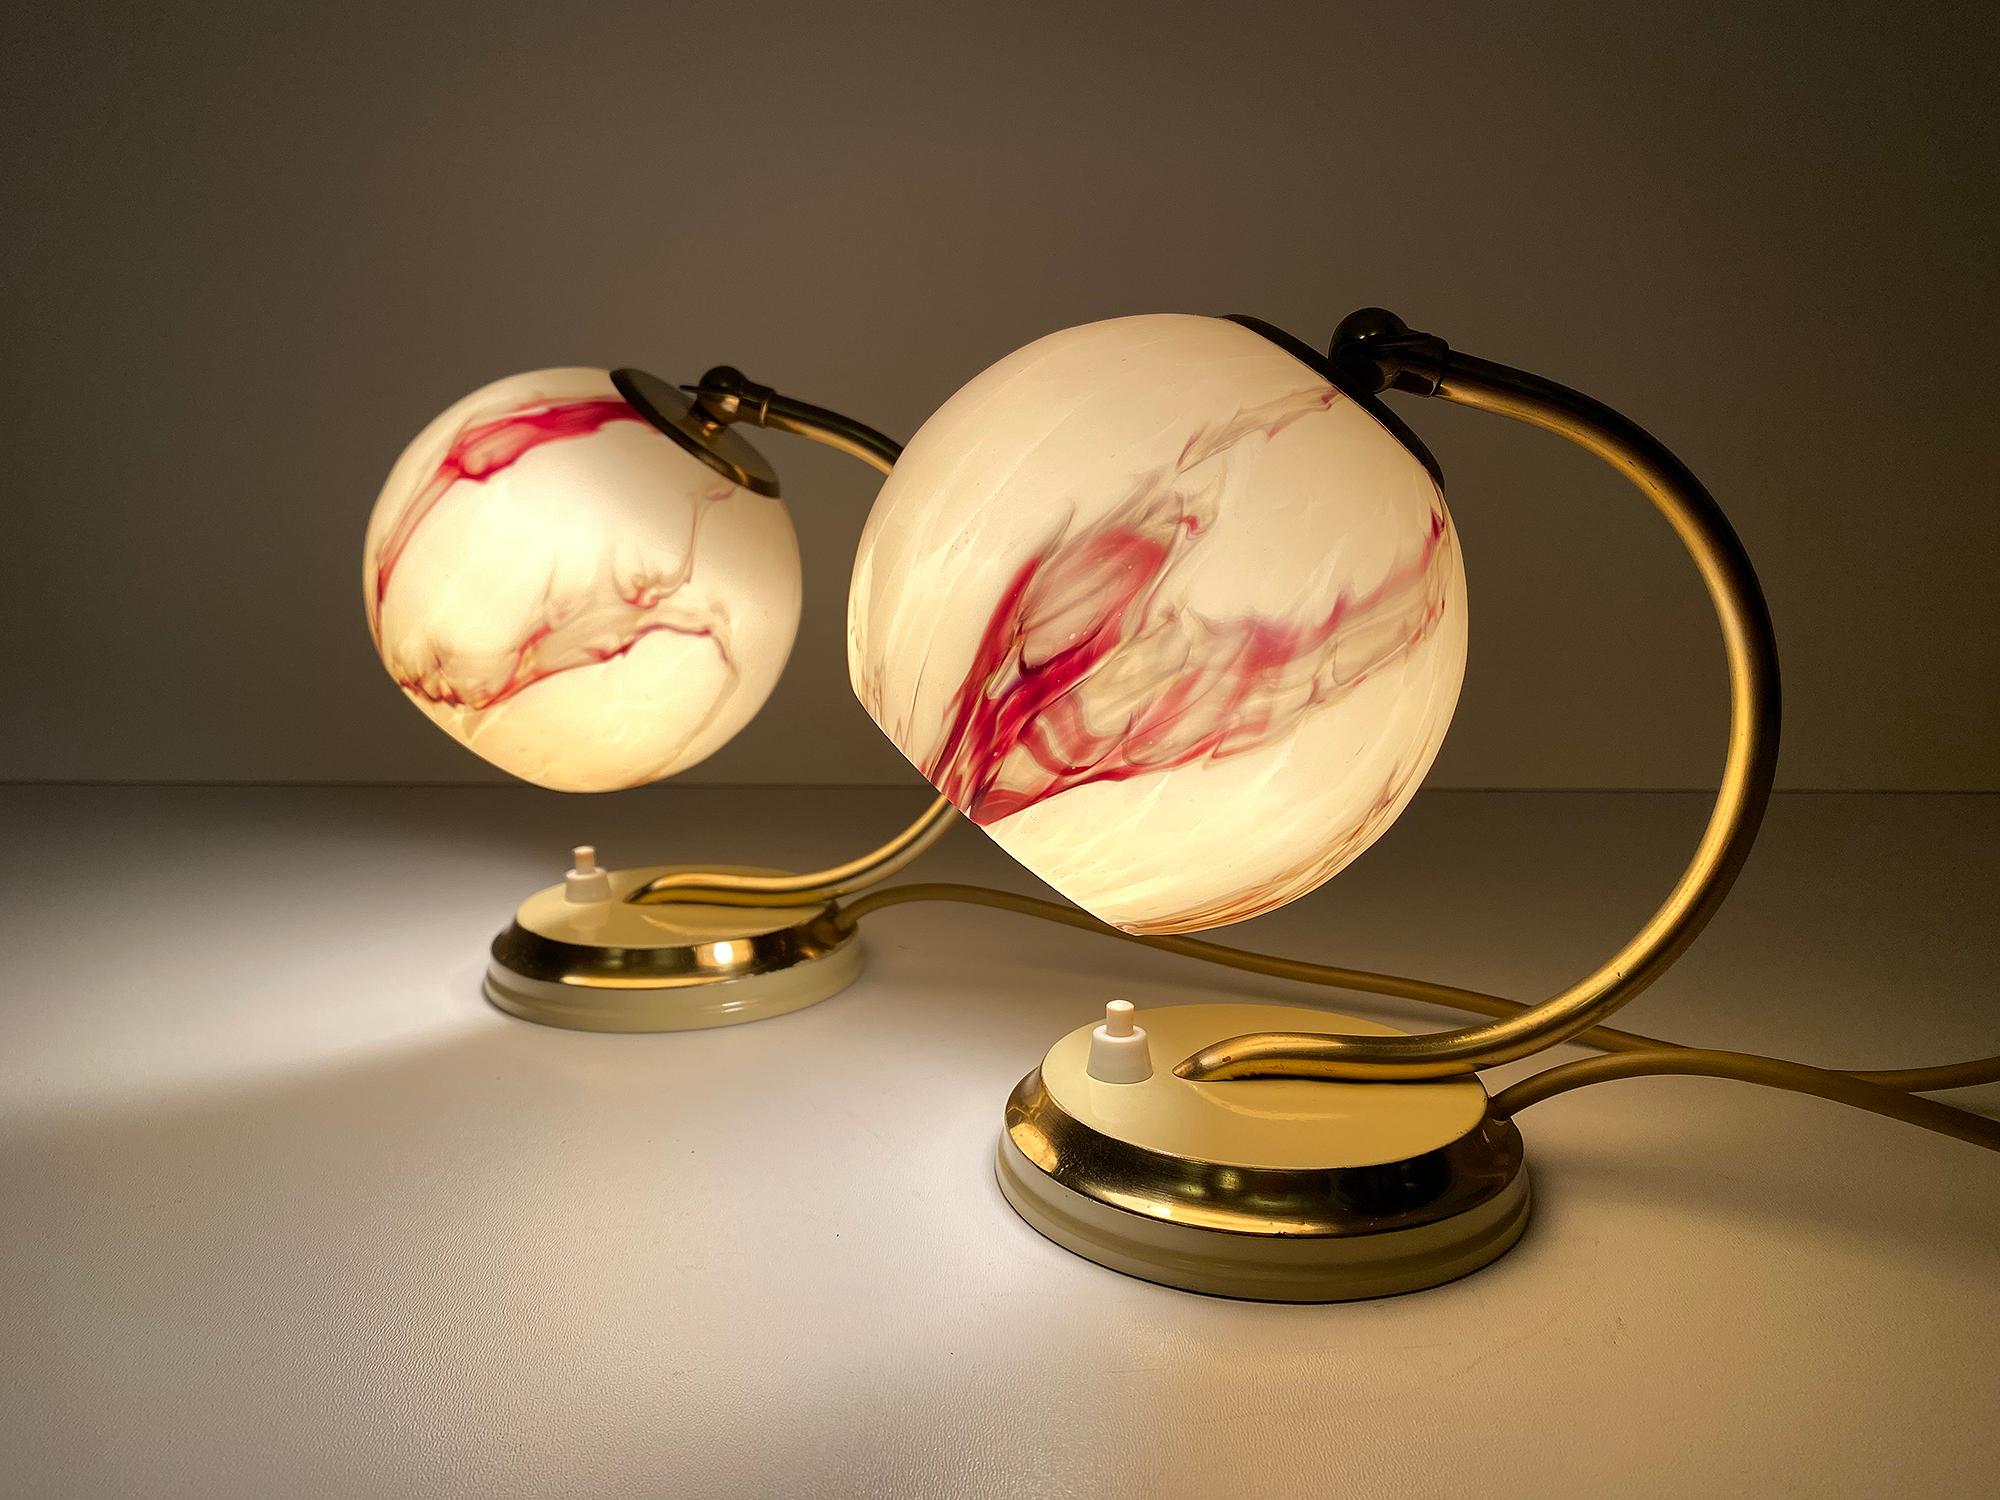 Pair of Art Deco table lamps, featuring a cream white enameled base with brass trim, polished brass cradle shaped stems and caps with cream white trim, absolutely stunning marbleized opaline glass shades, overlay glass, cream white with oxblood